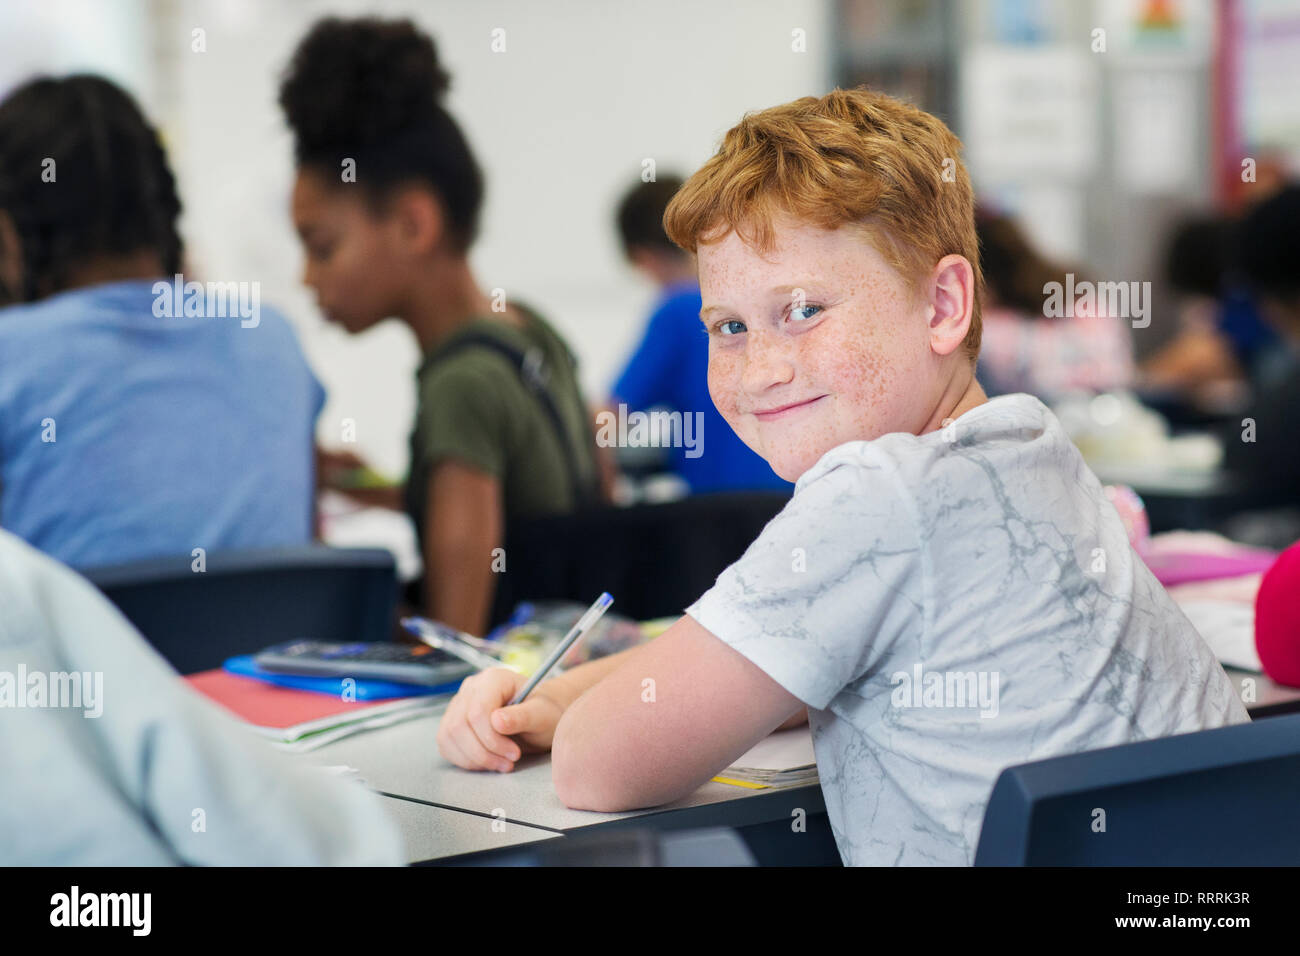 Portrait smiling, confident junior high school boy student studying at desk in classroom Stock Photo